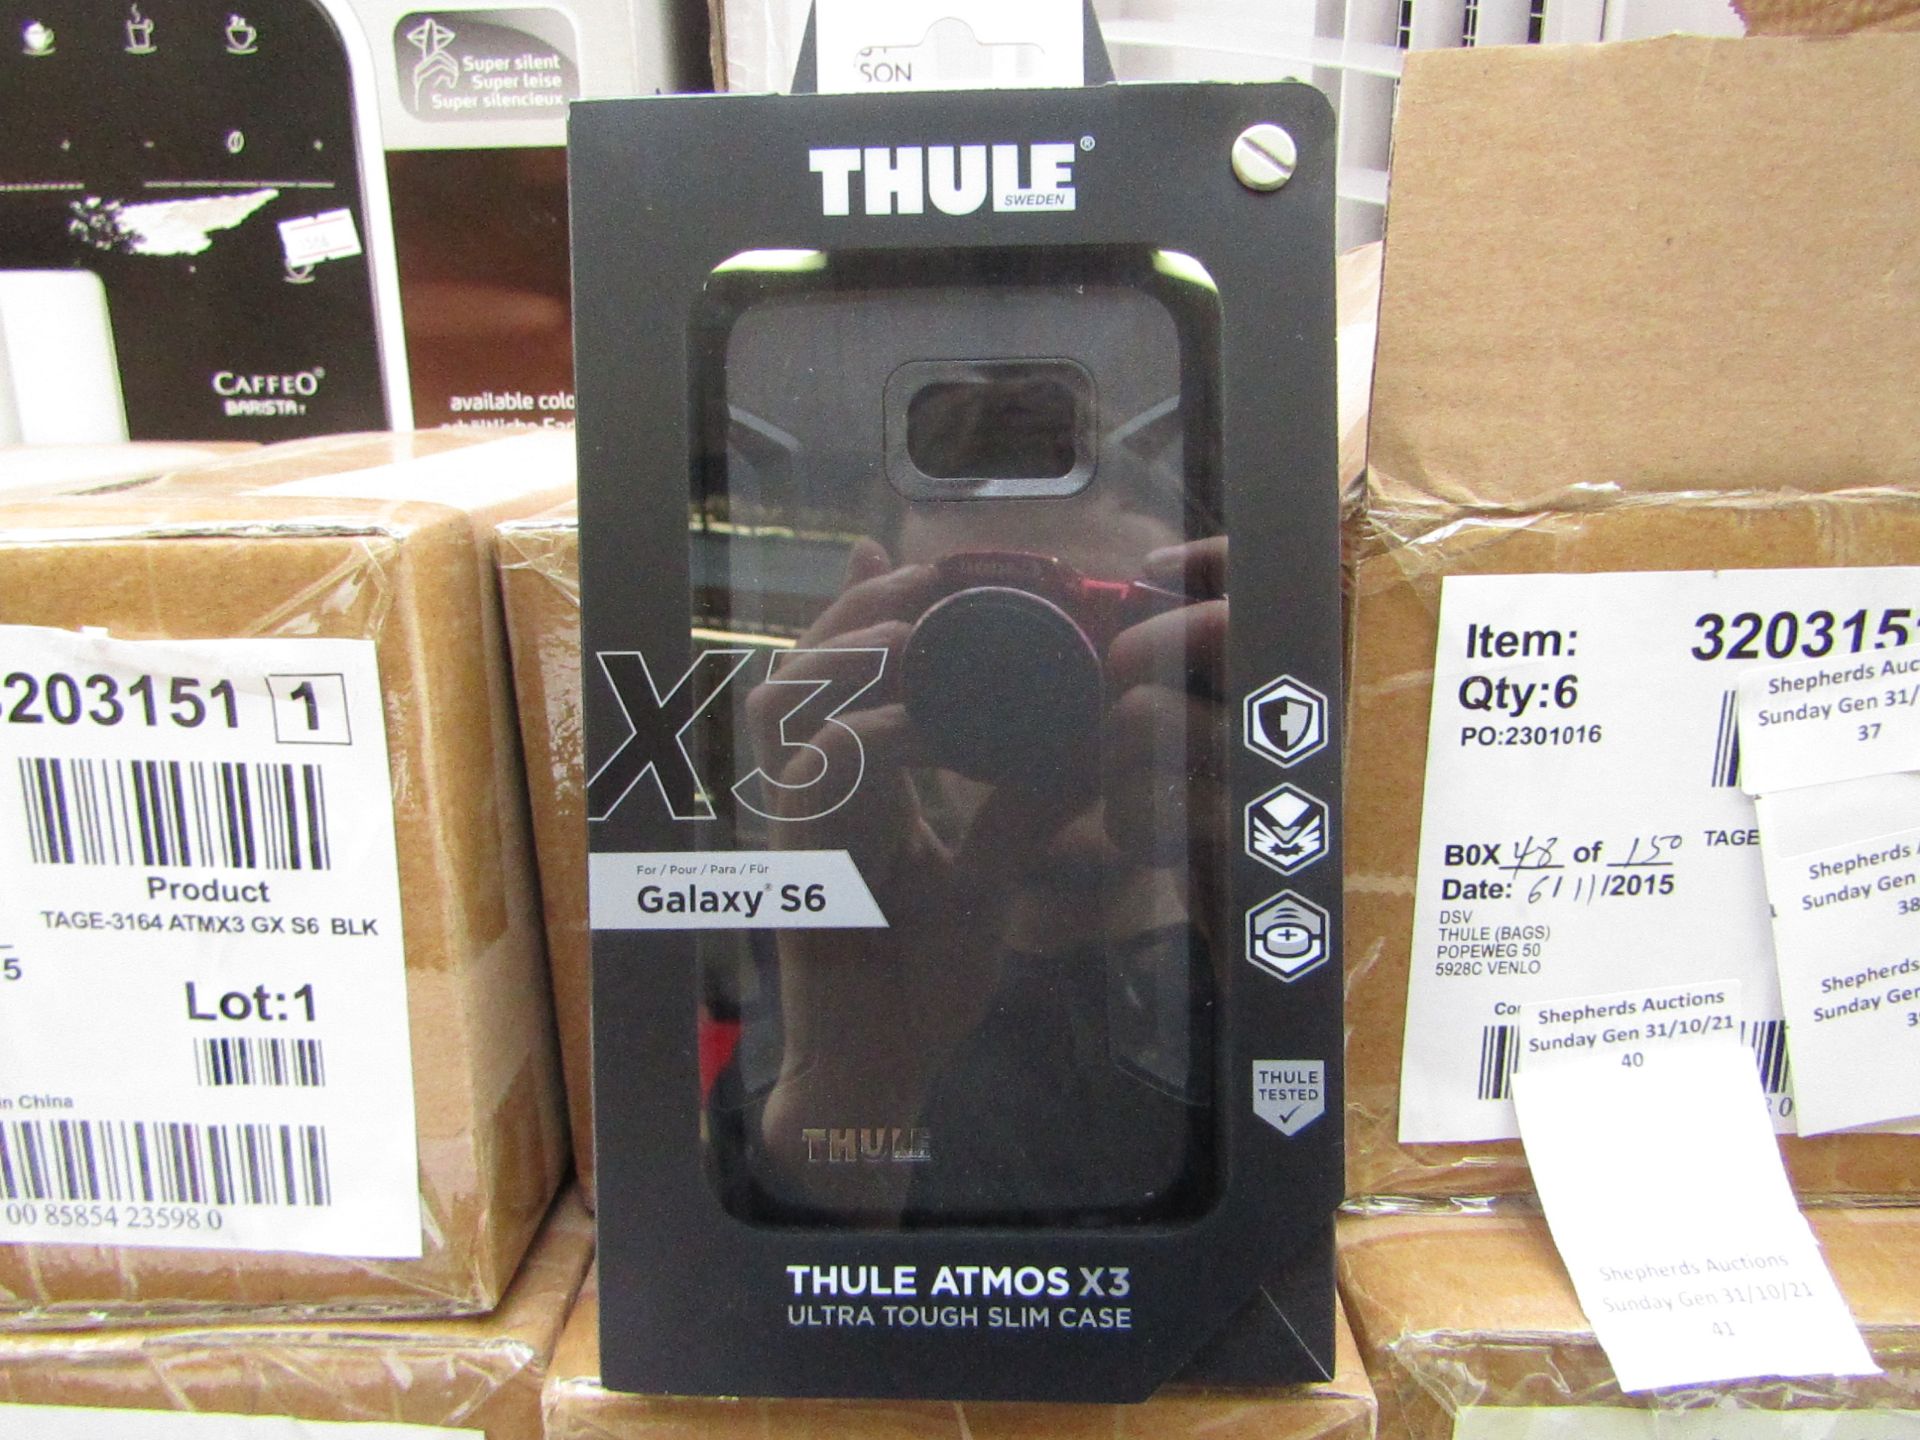 2x box containg 6 thule samsung galaxy s6 phone case - new & packaged.